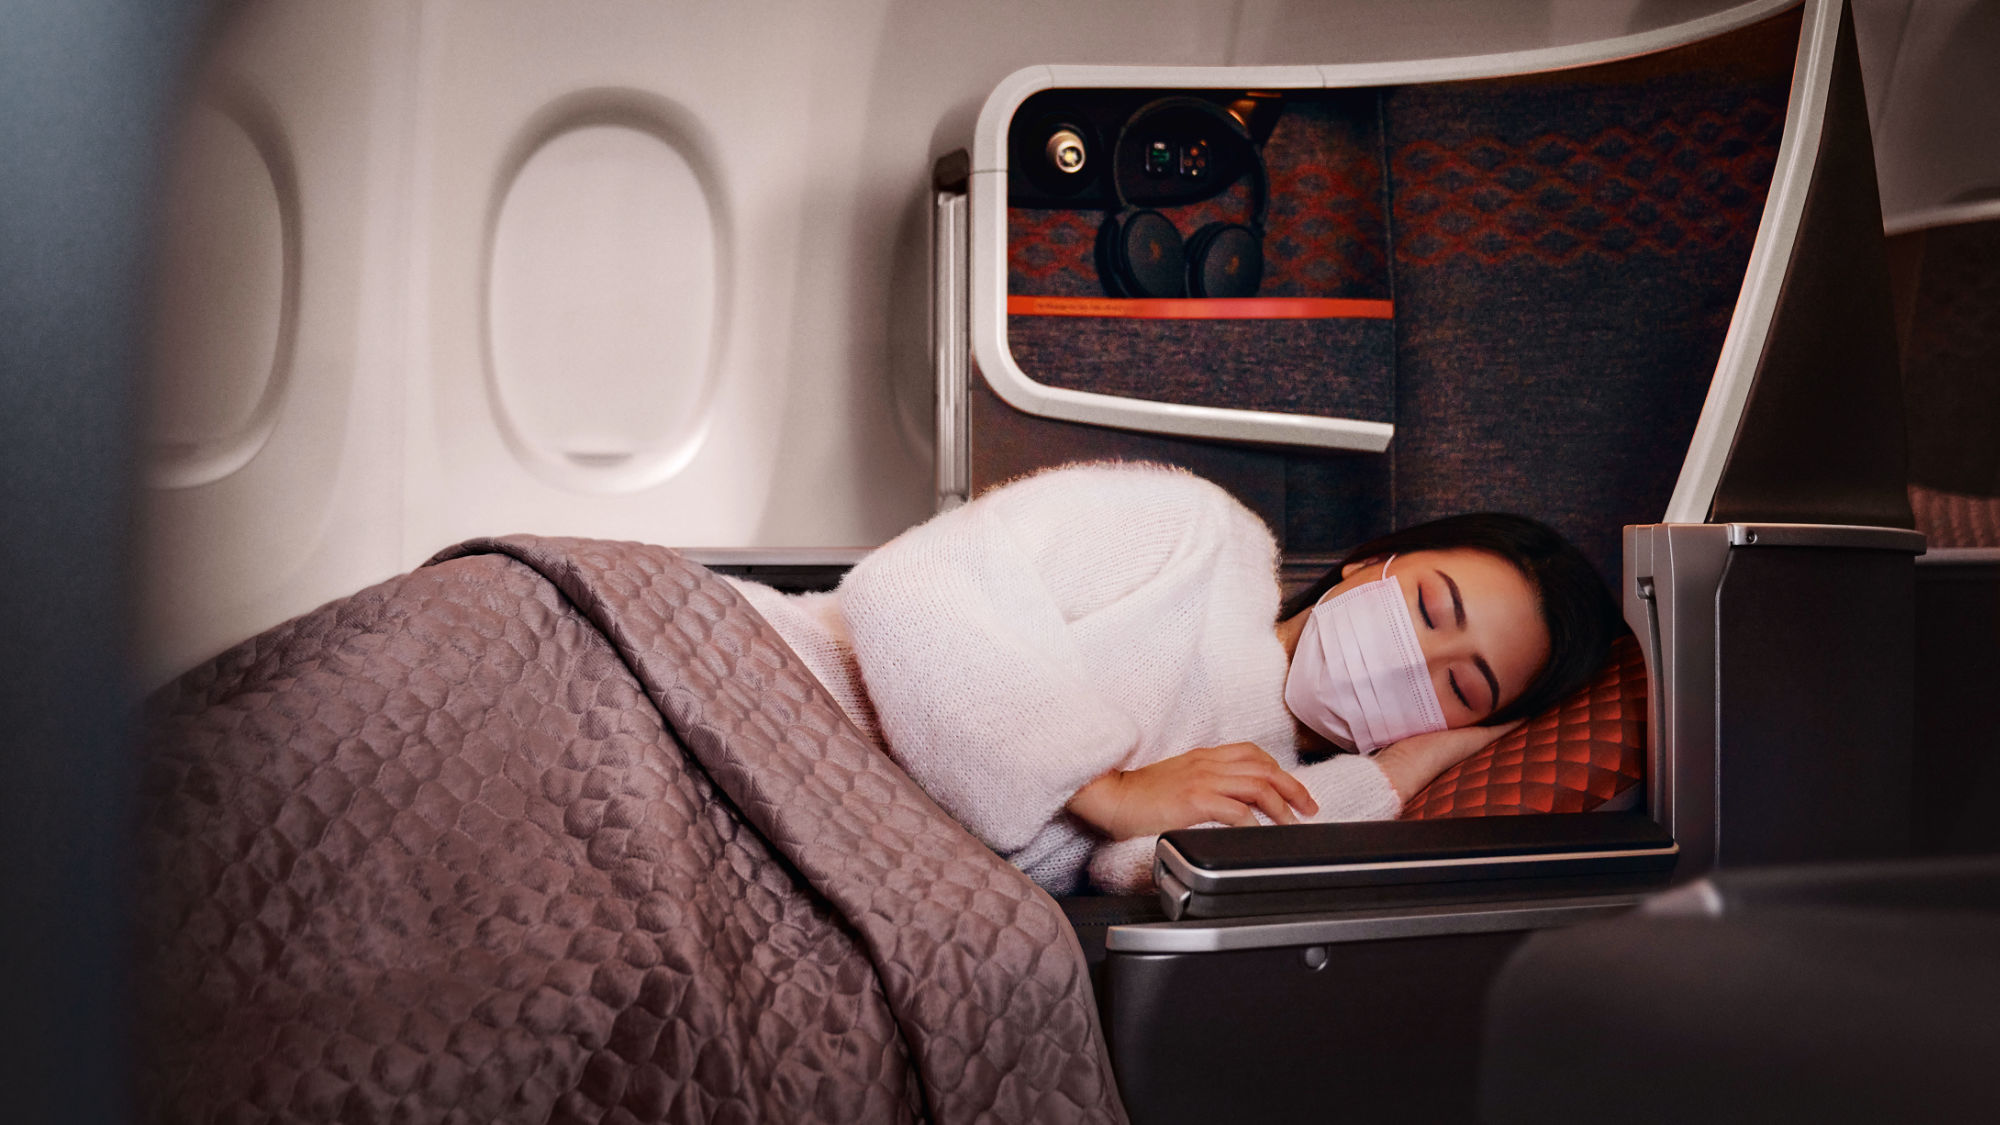 Singapore Airlines Business Class beds on all Australia routes Point Hacks